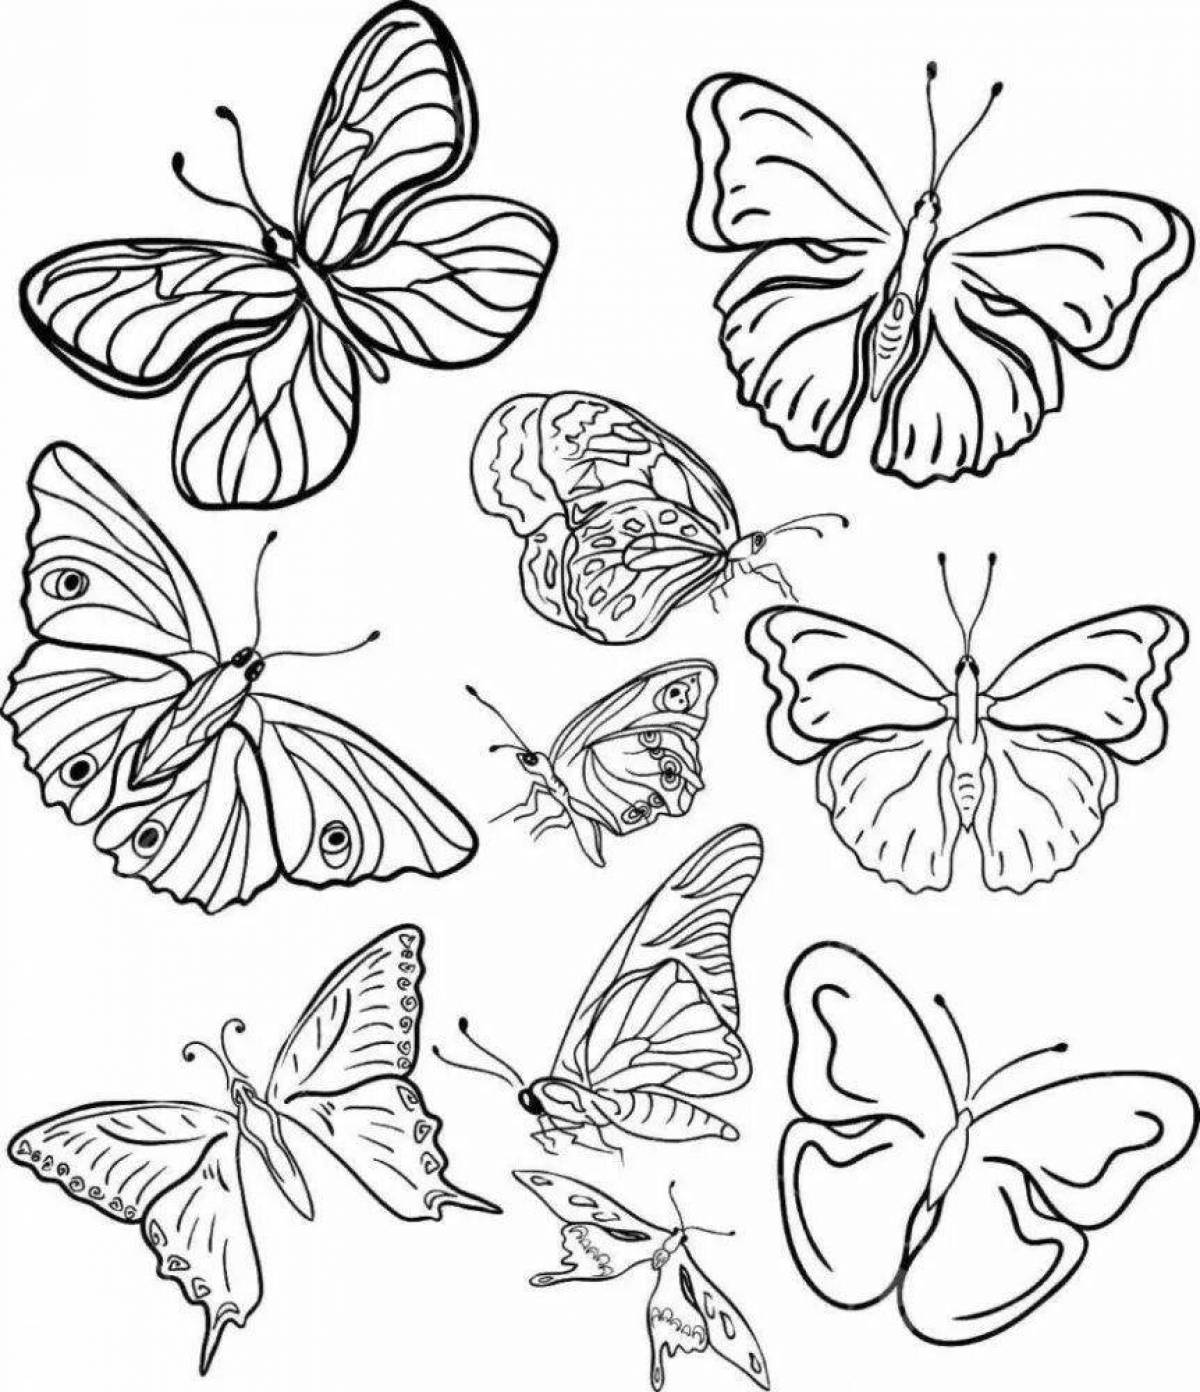 Many colorful butterflies on one sheet